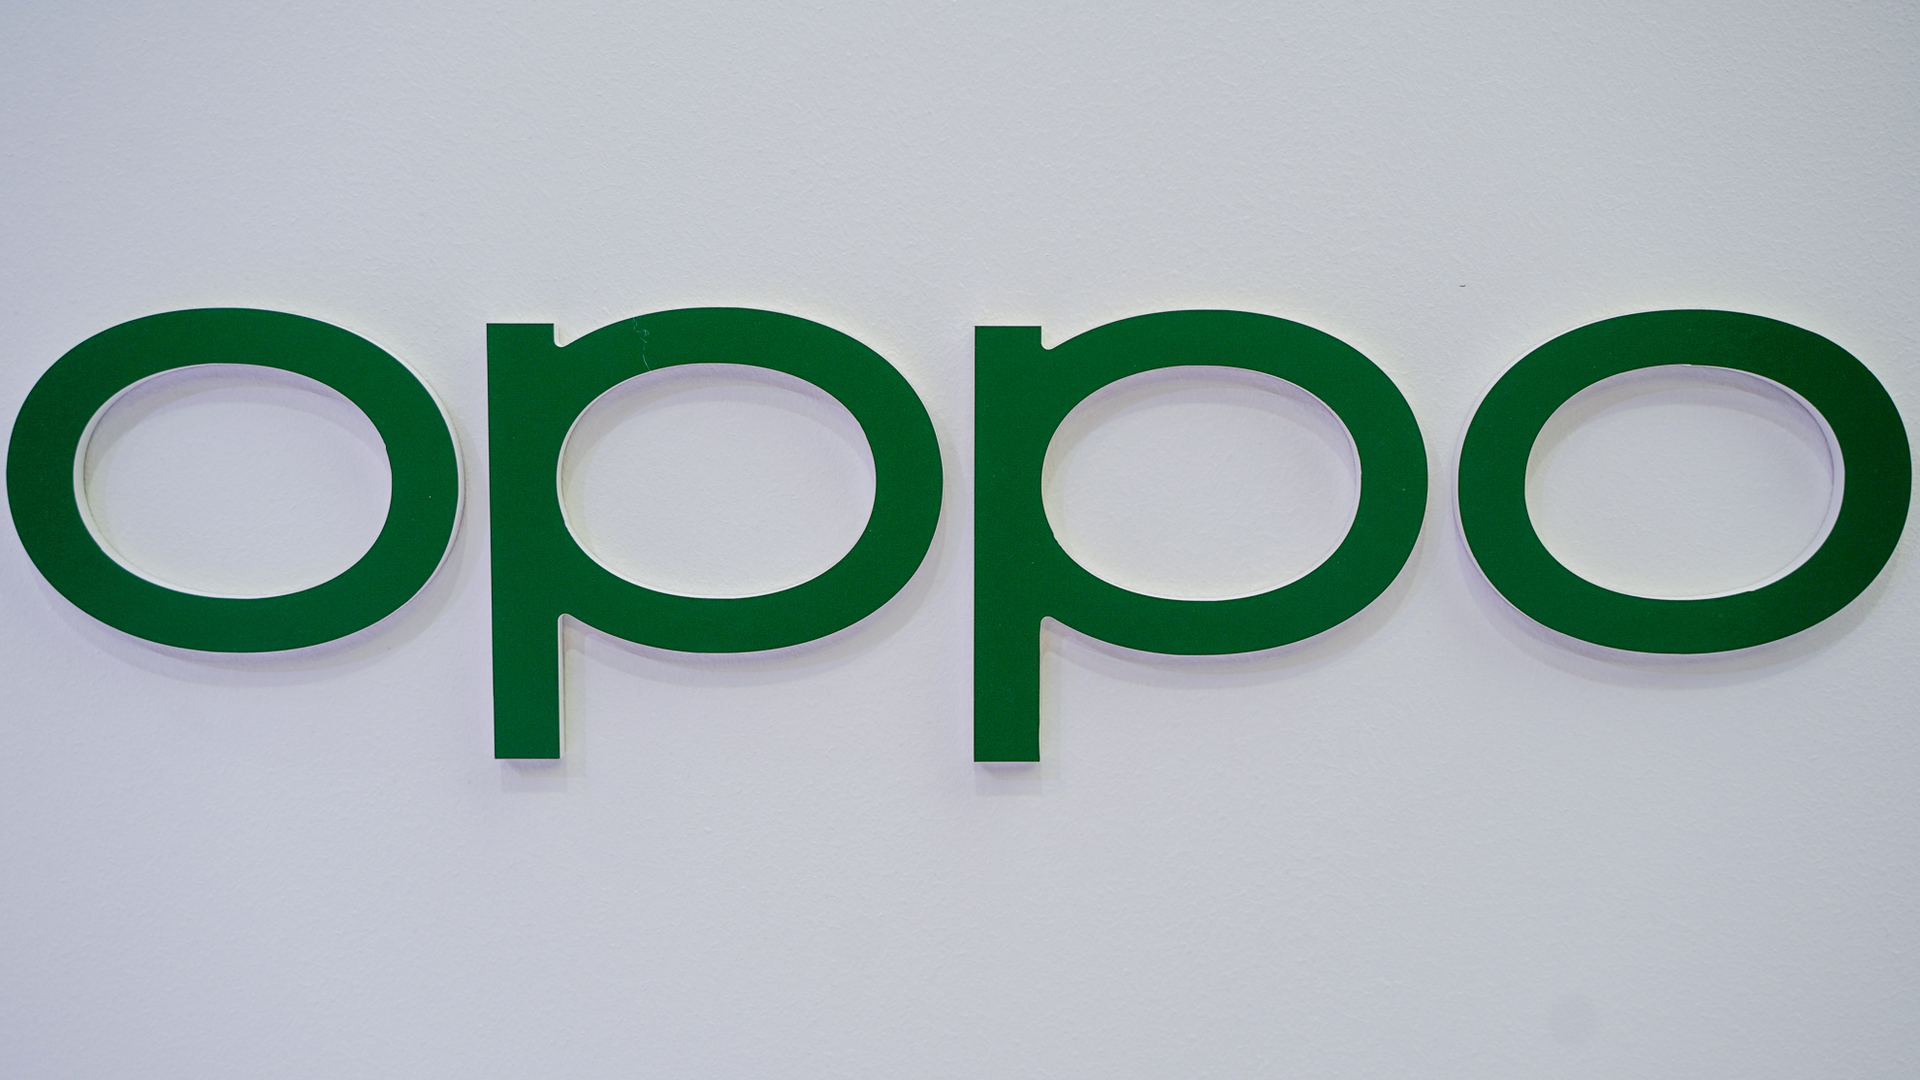 OPPO logo in green on white MWC 2022